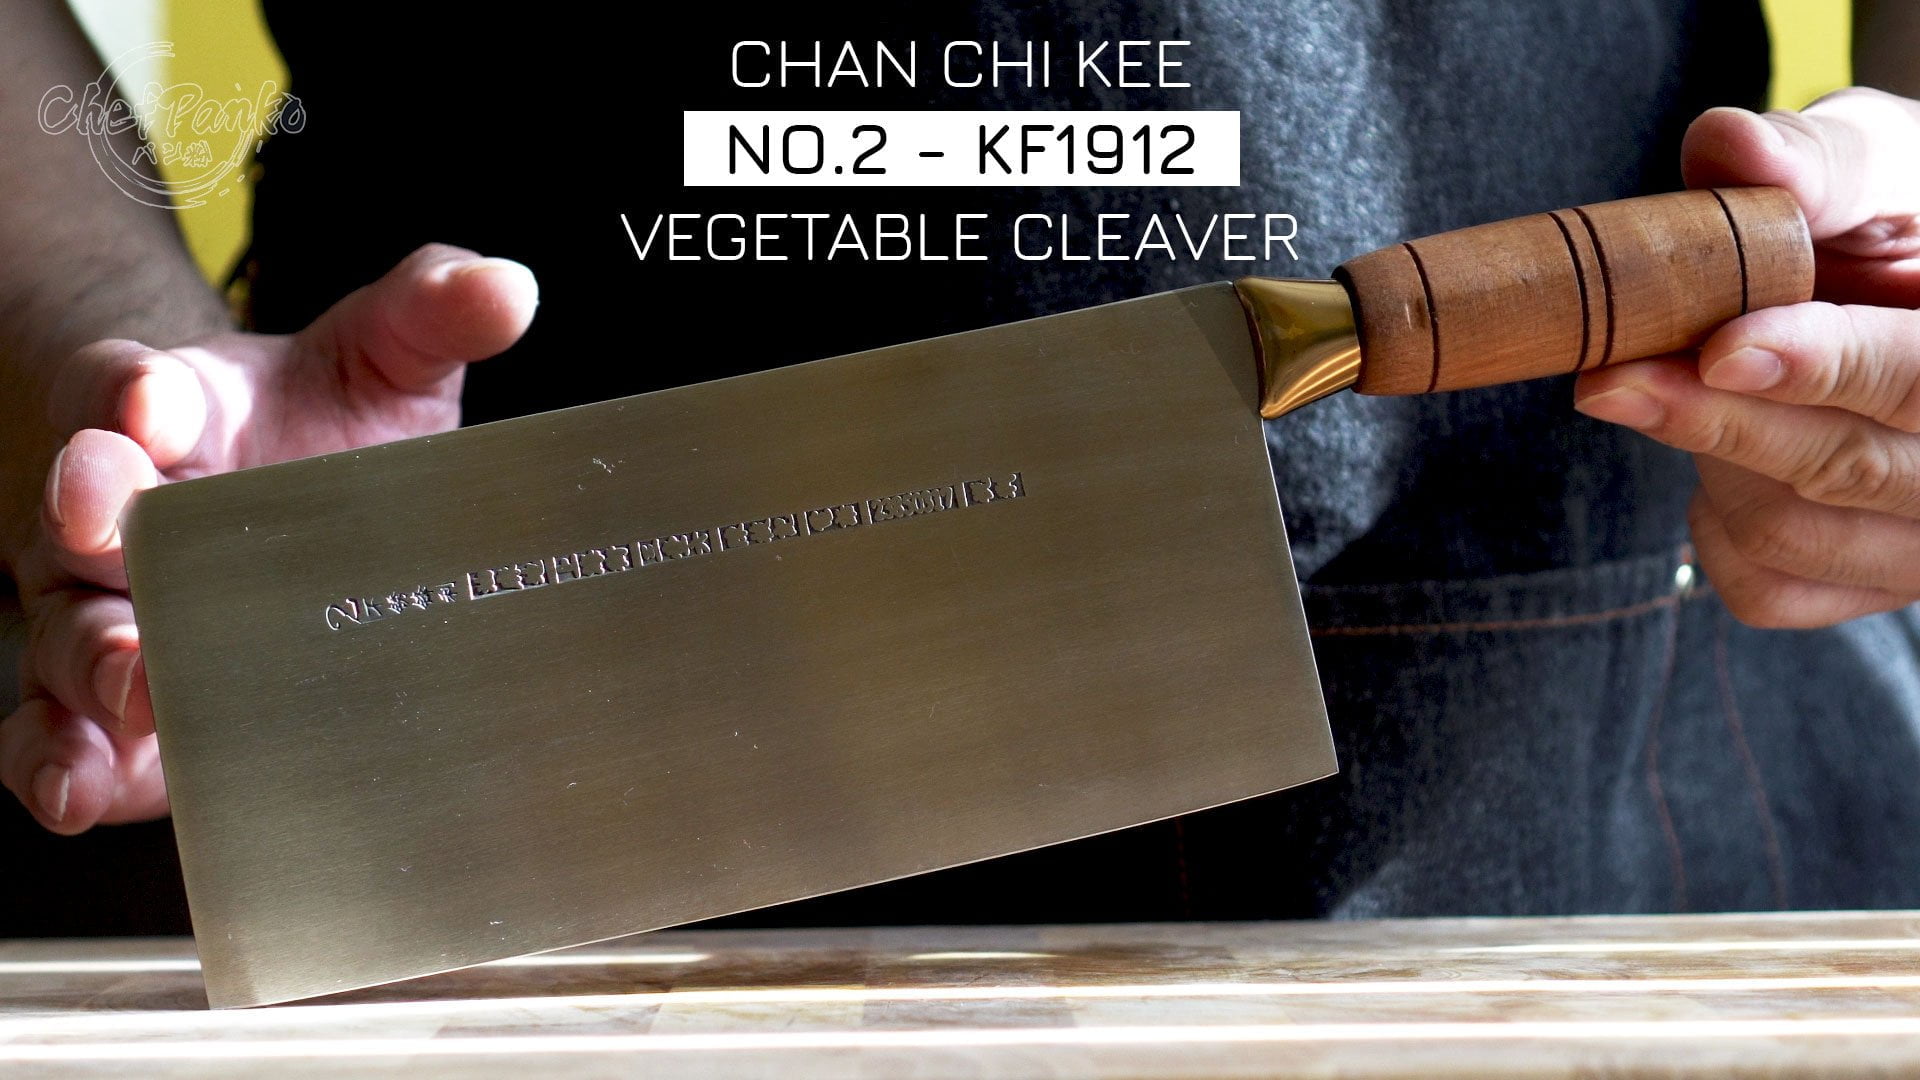 CCK Vegetable Cleaver (Slicer) KF1912 - Chan Chi Kee Cai Dao - ChefPanko